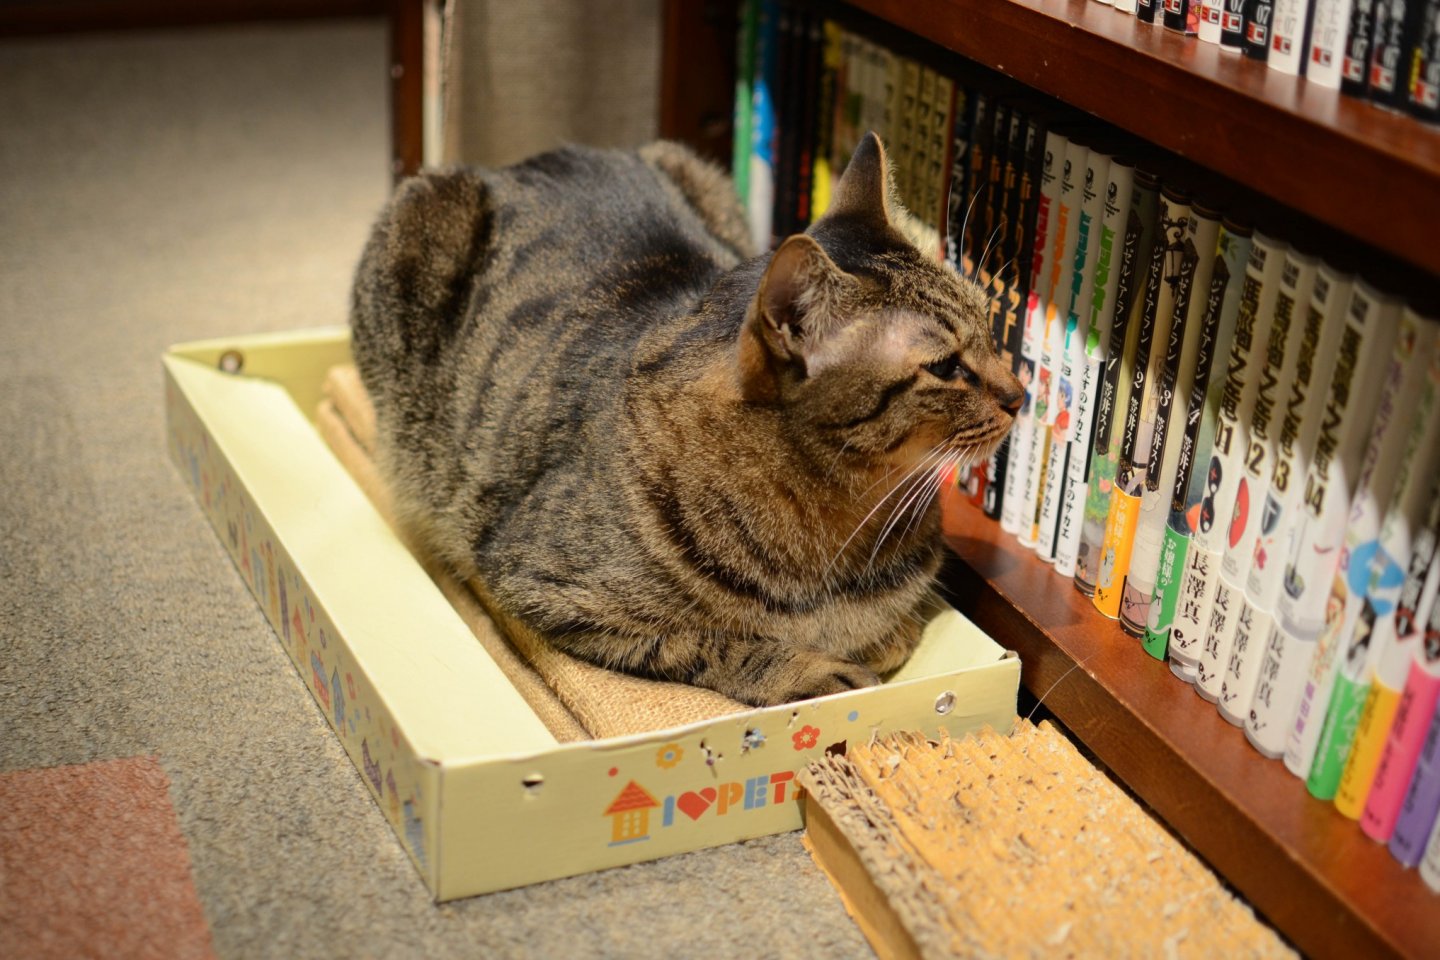 One of the cats surveying the extensive library of manga